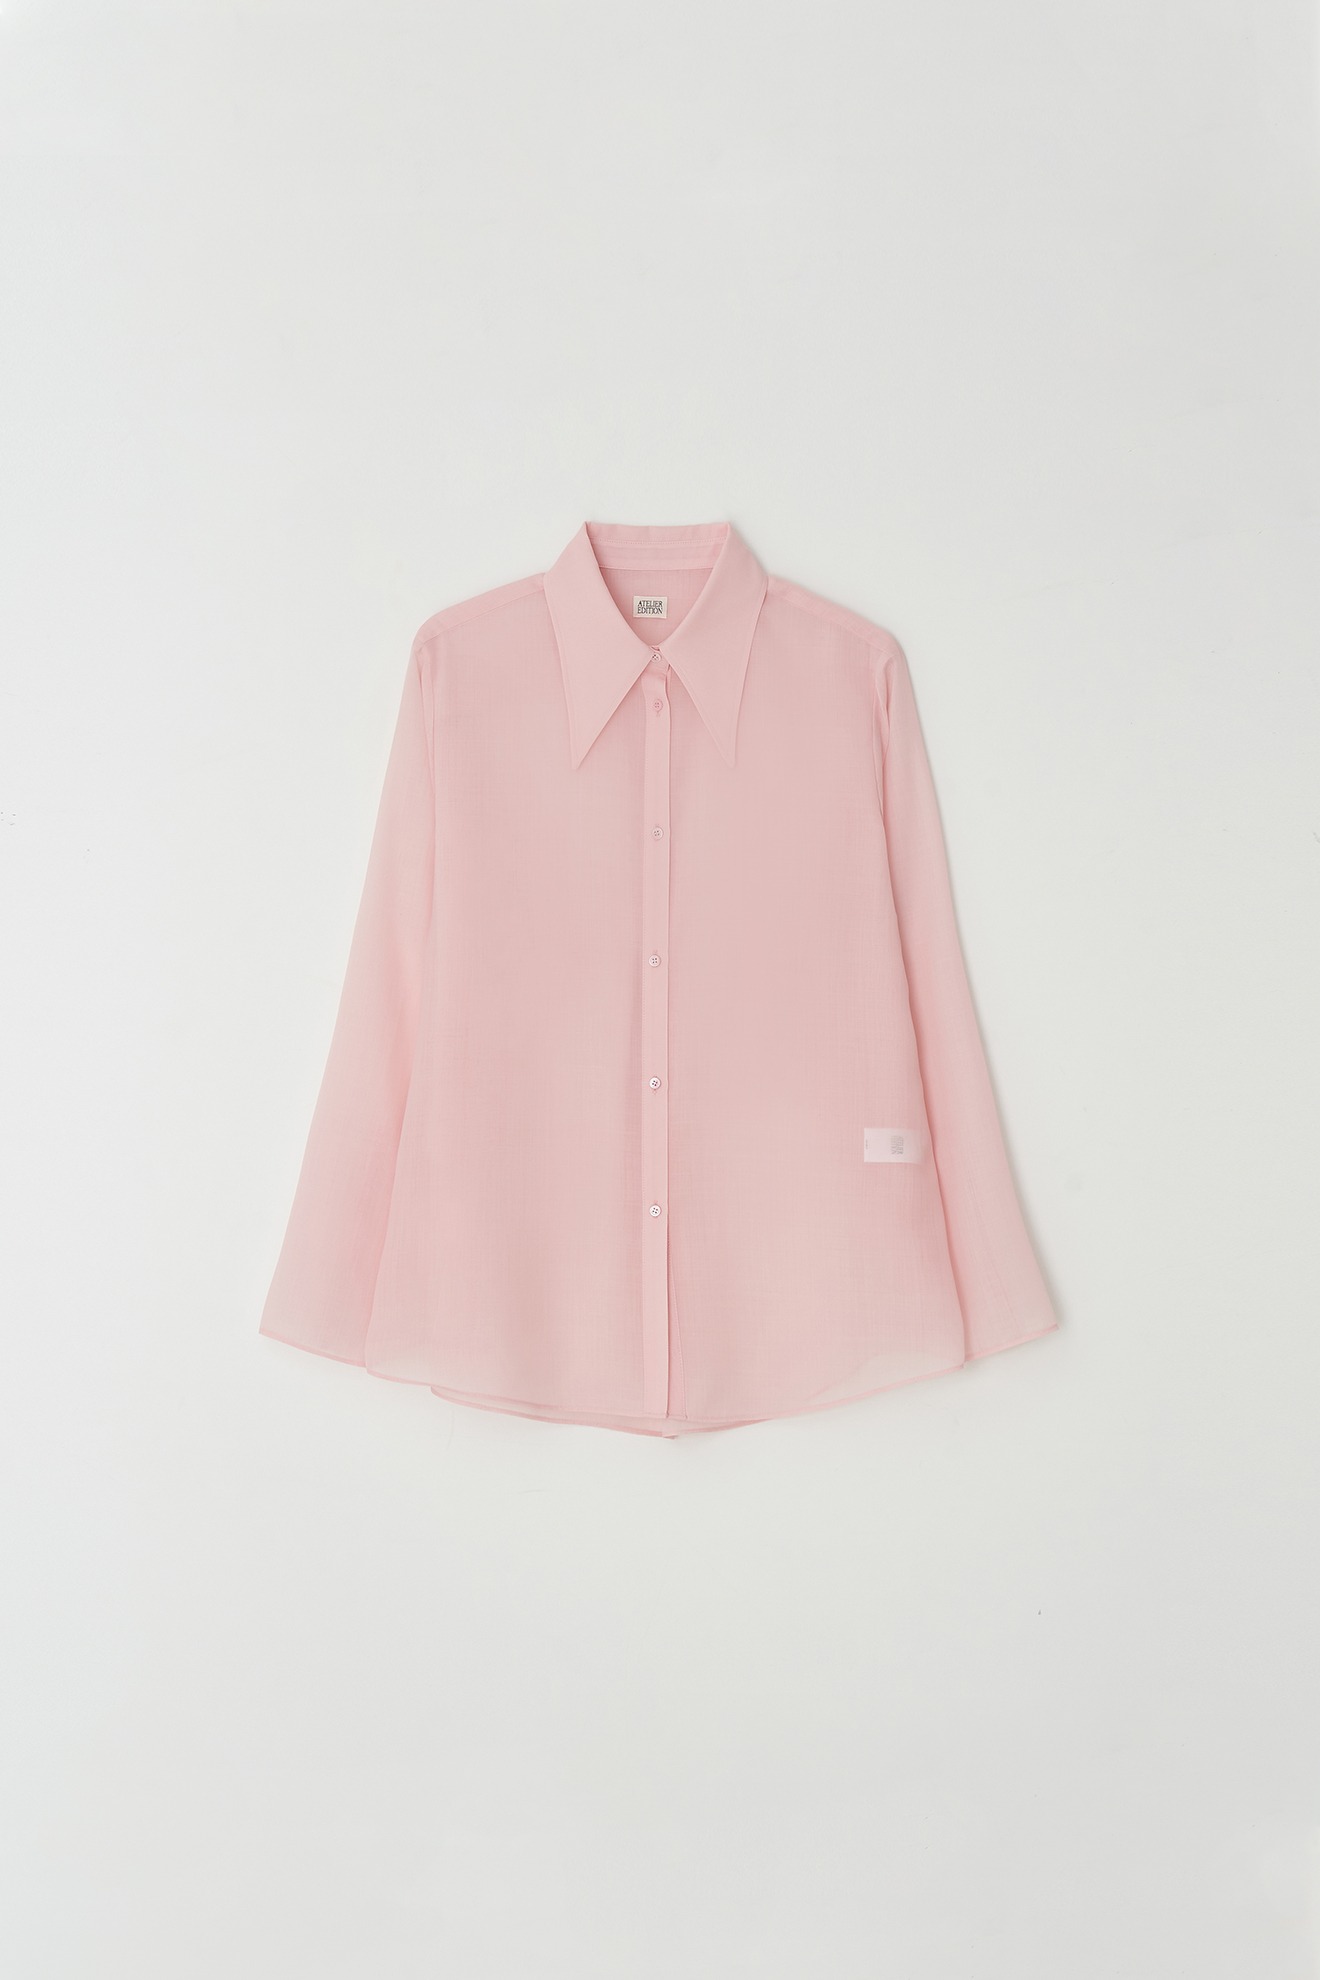 Silhouette Blouse (pink)